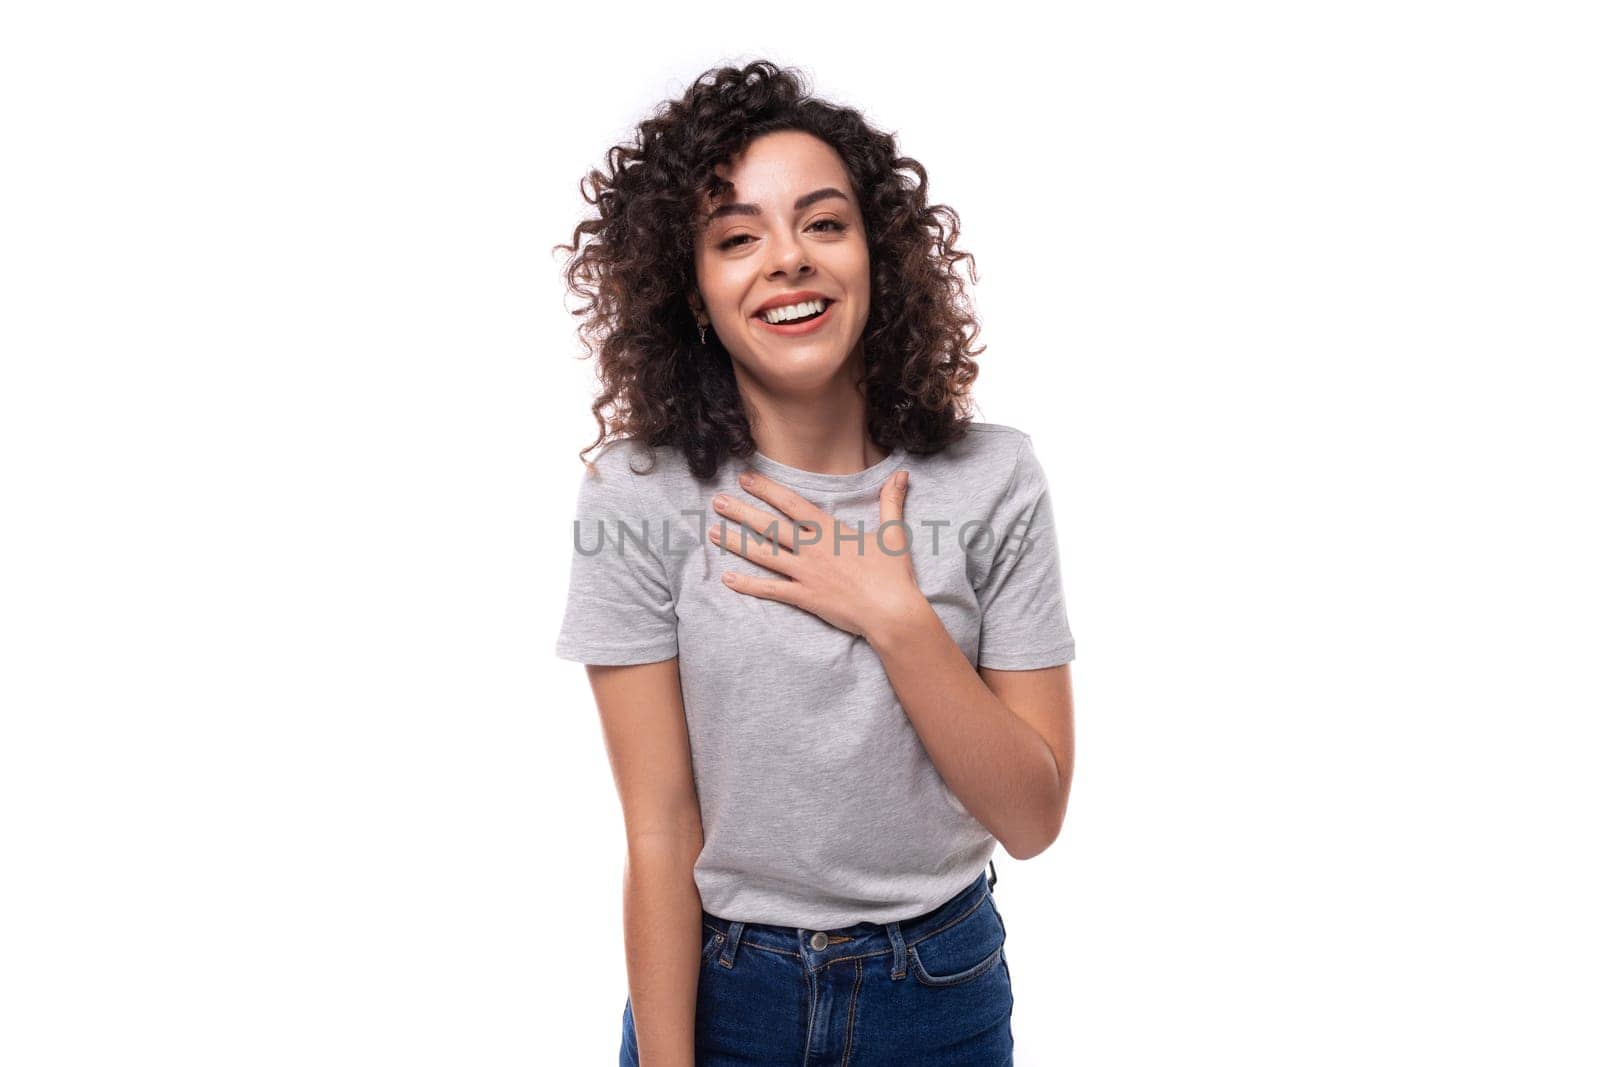 kind slender young caucasian woman with careless black curly hair is dressed in a gray t-shirt on a white background.